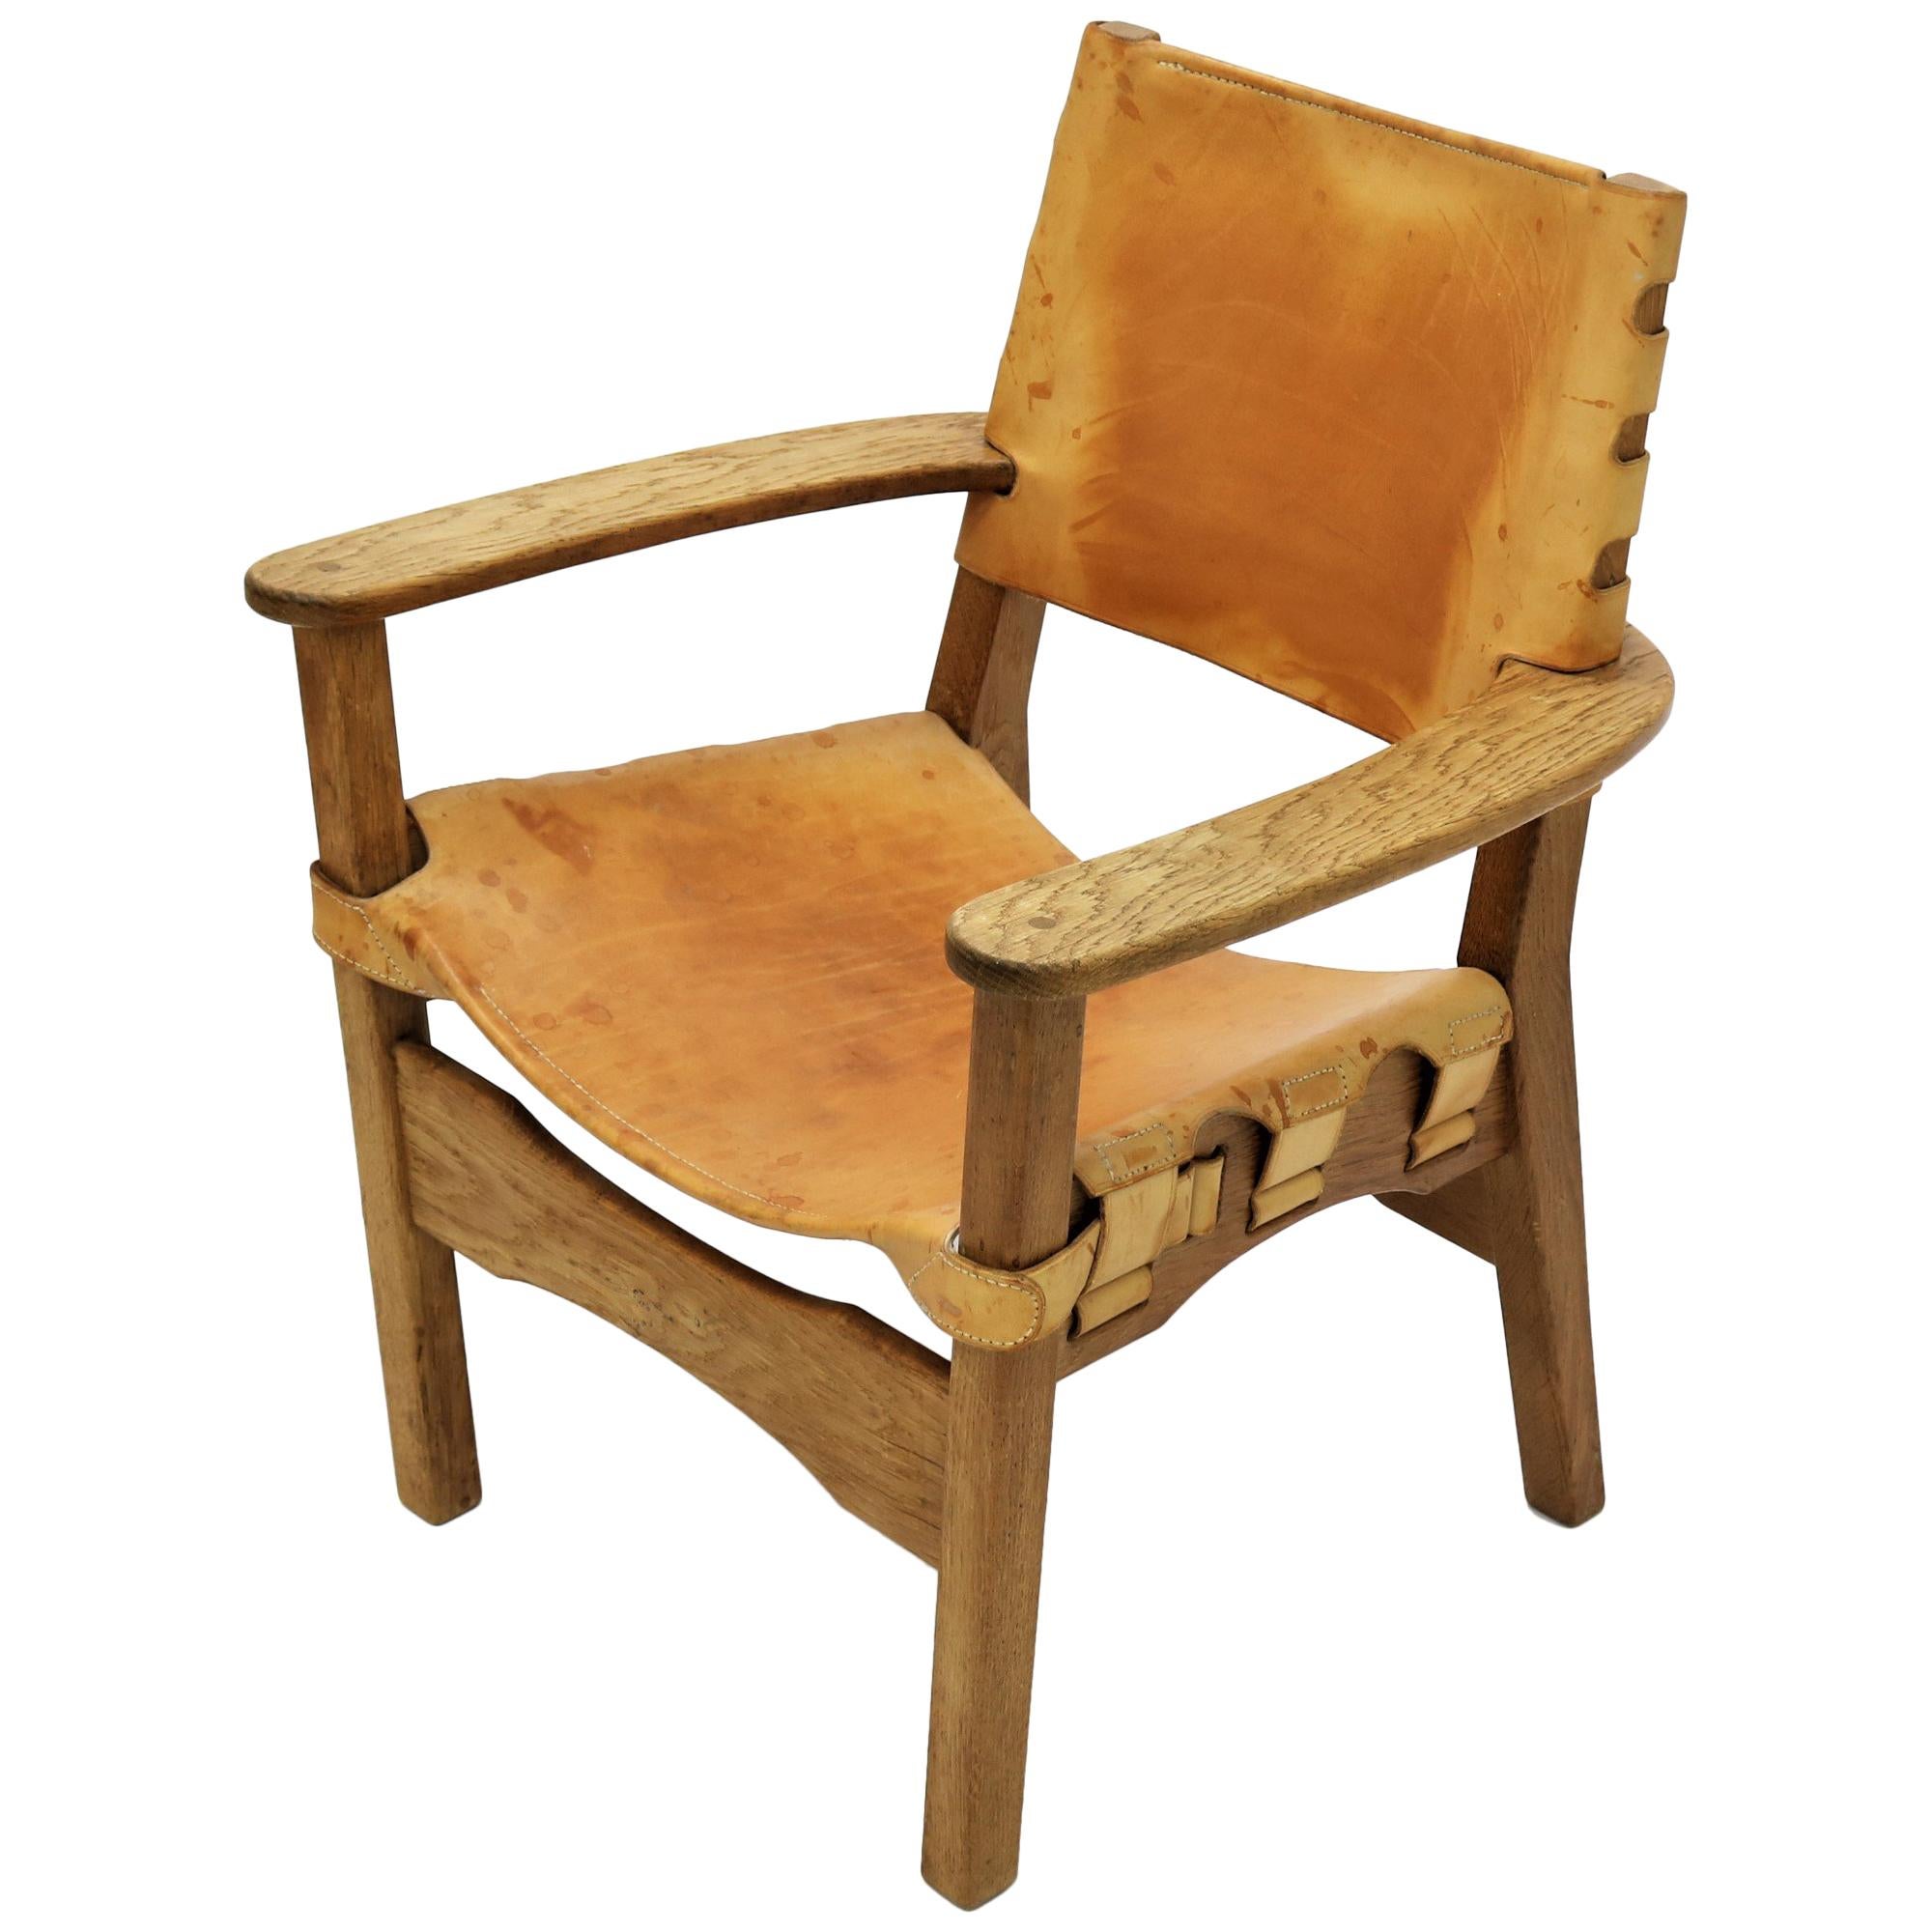 Scandinavian Modern Armchair in Oak and Saddle Leather, 1960s